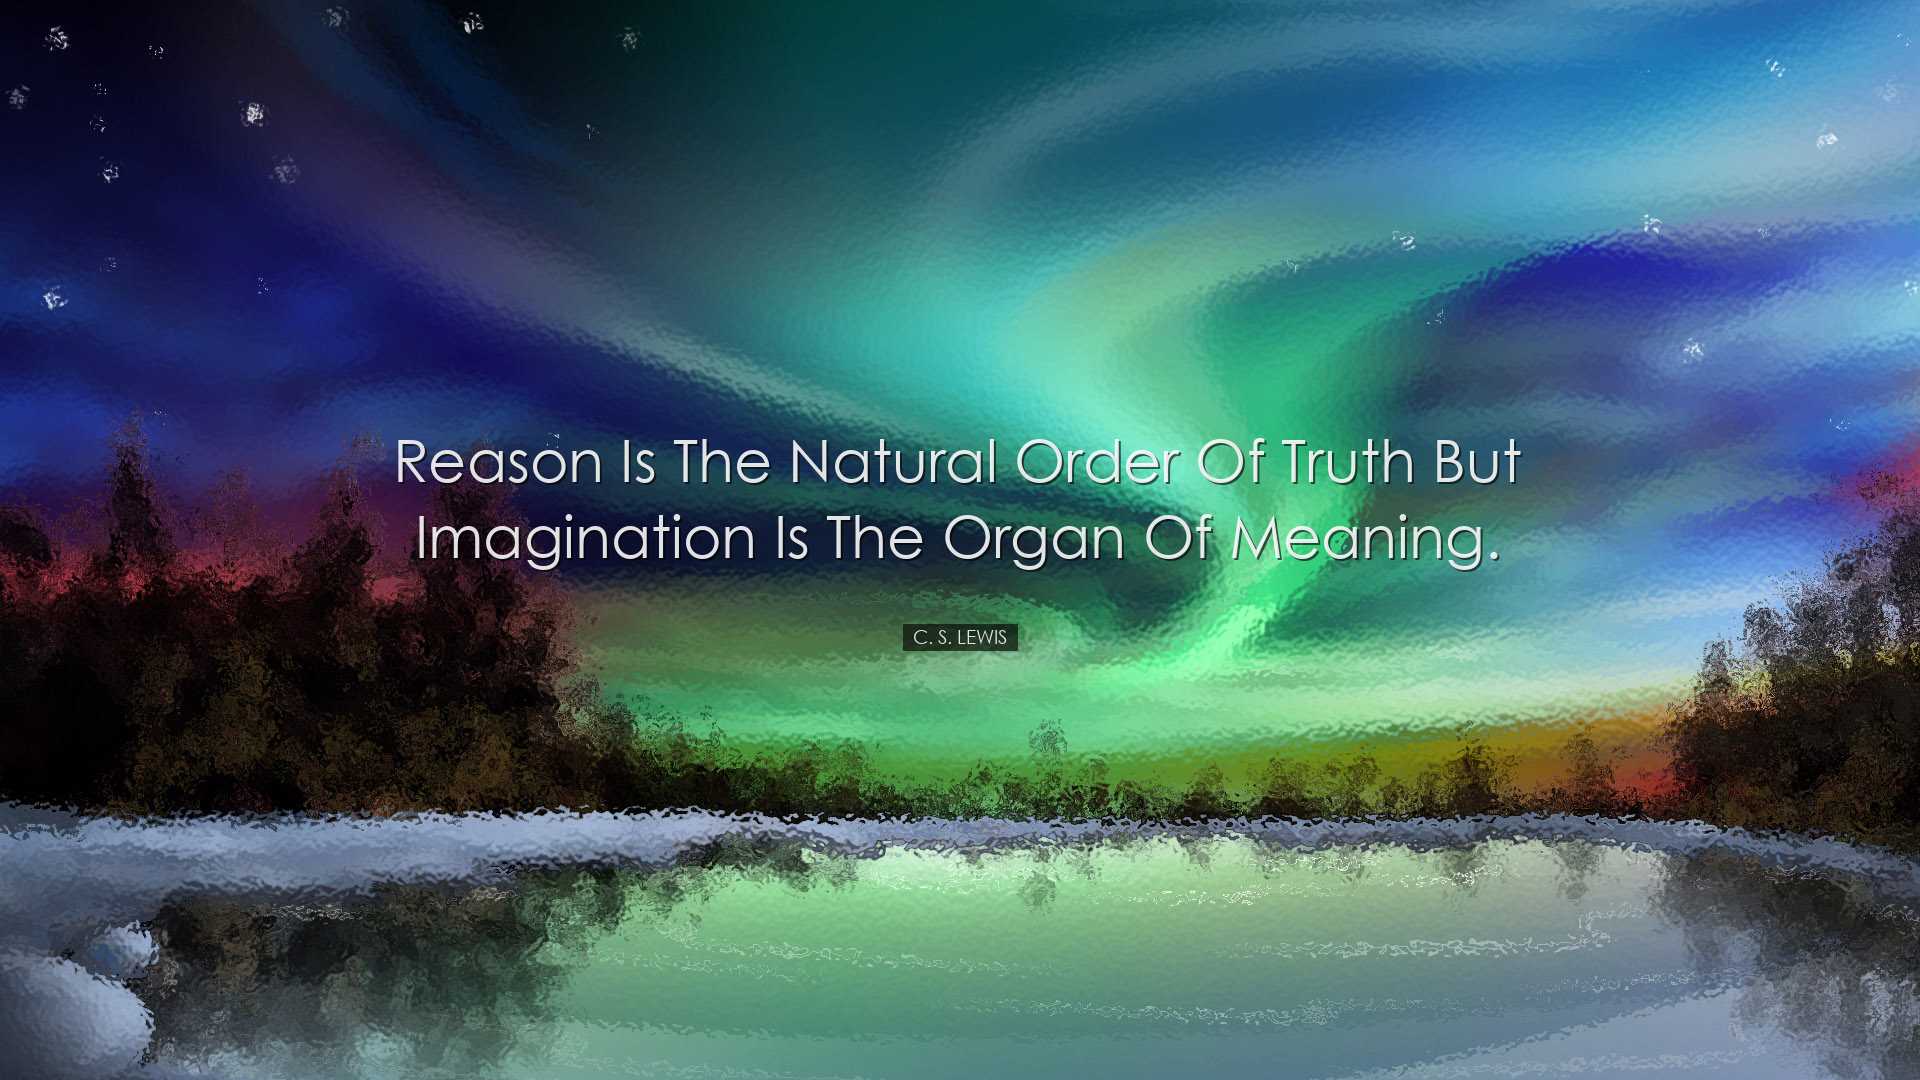 Reason is the natural order of truth but imagination is the organ